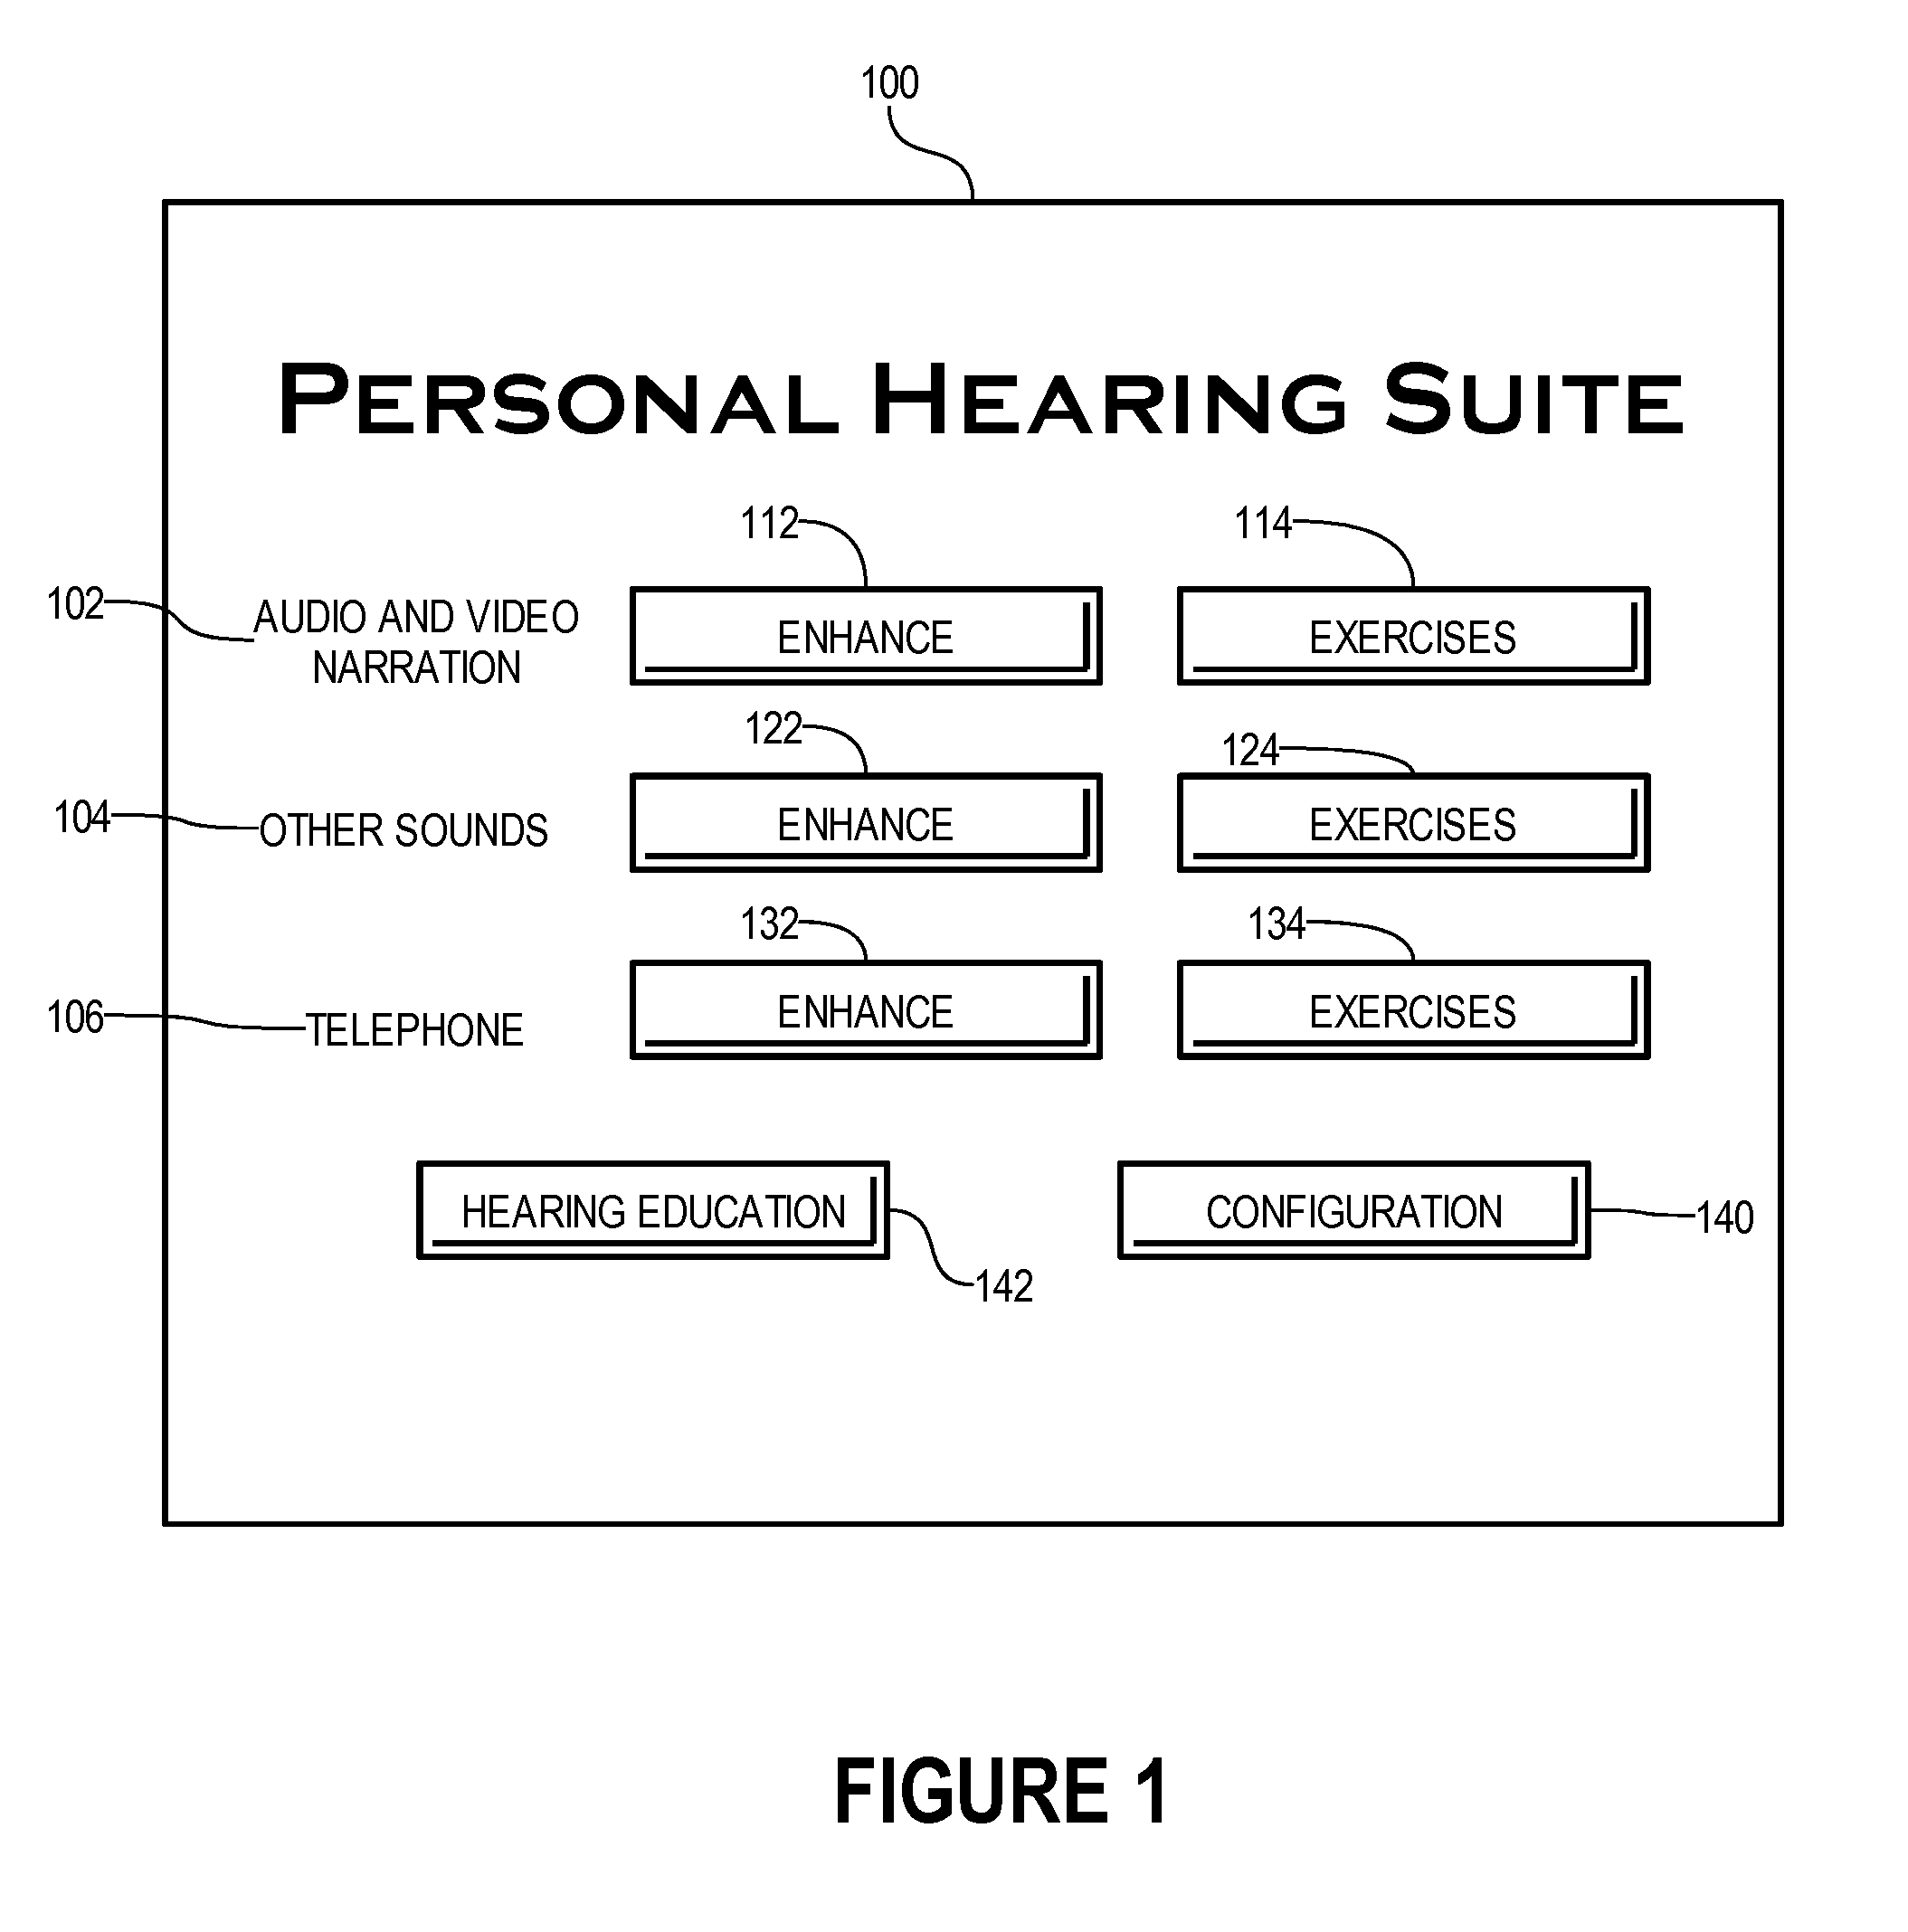 Personal hearing suite